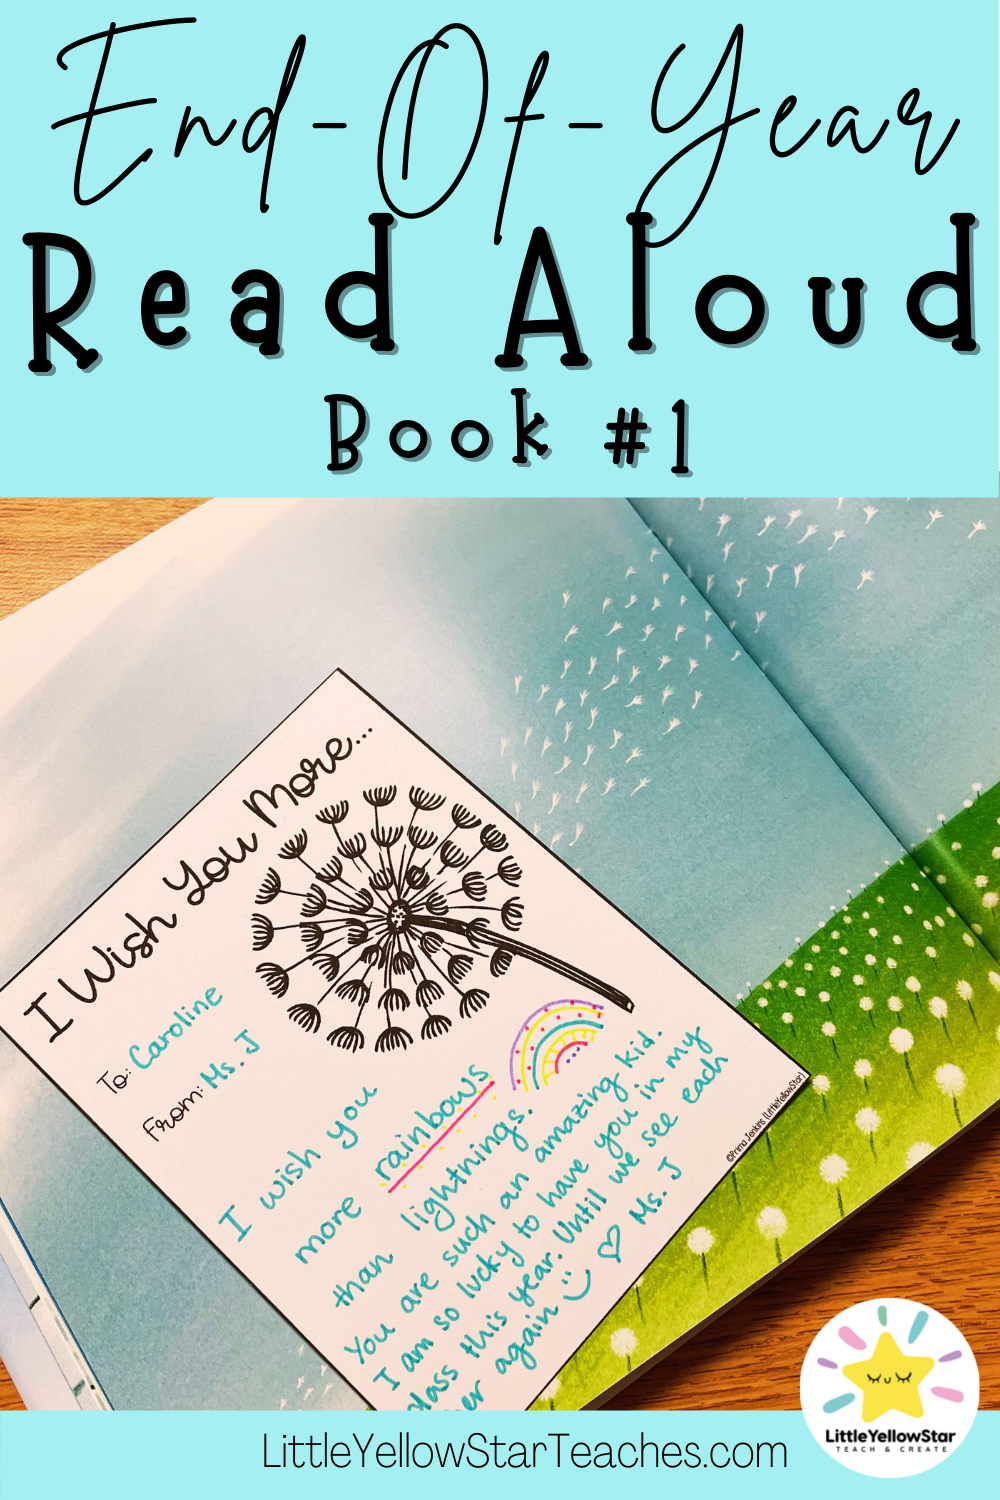 End of year read aloud book - I Wish You More by Amy Krouse Rosenthal. This is the perfect end of year read aloud book for the classroom! Pin this image to come back to the blog for details on this end of year read aloud lesson plan.